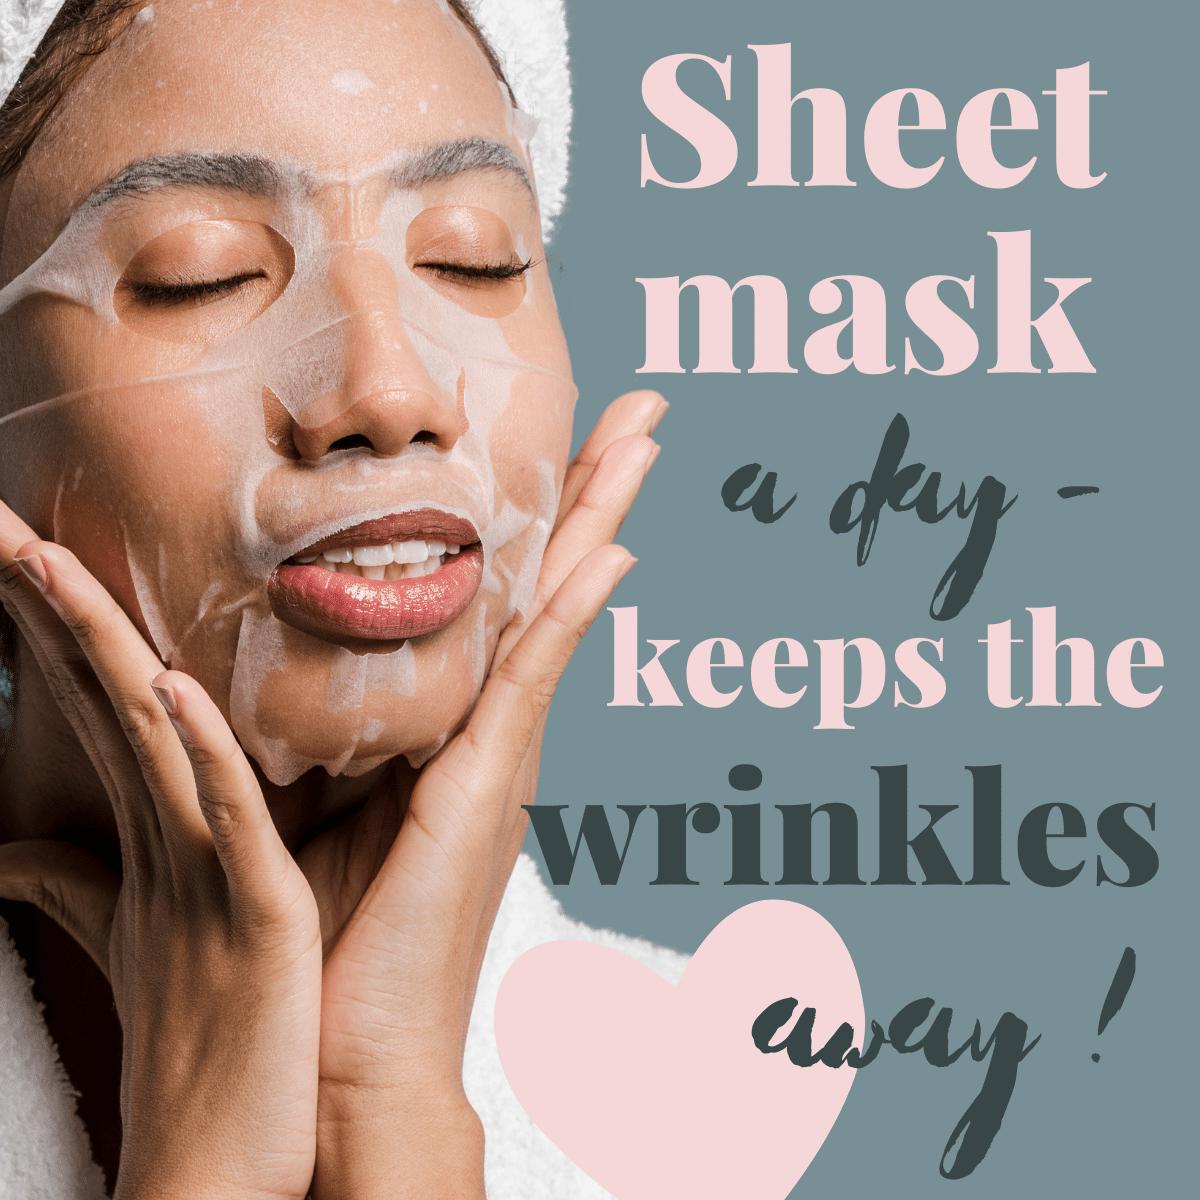 One sheet a day keeps the wrinkles away!